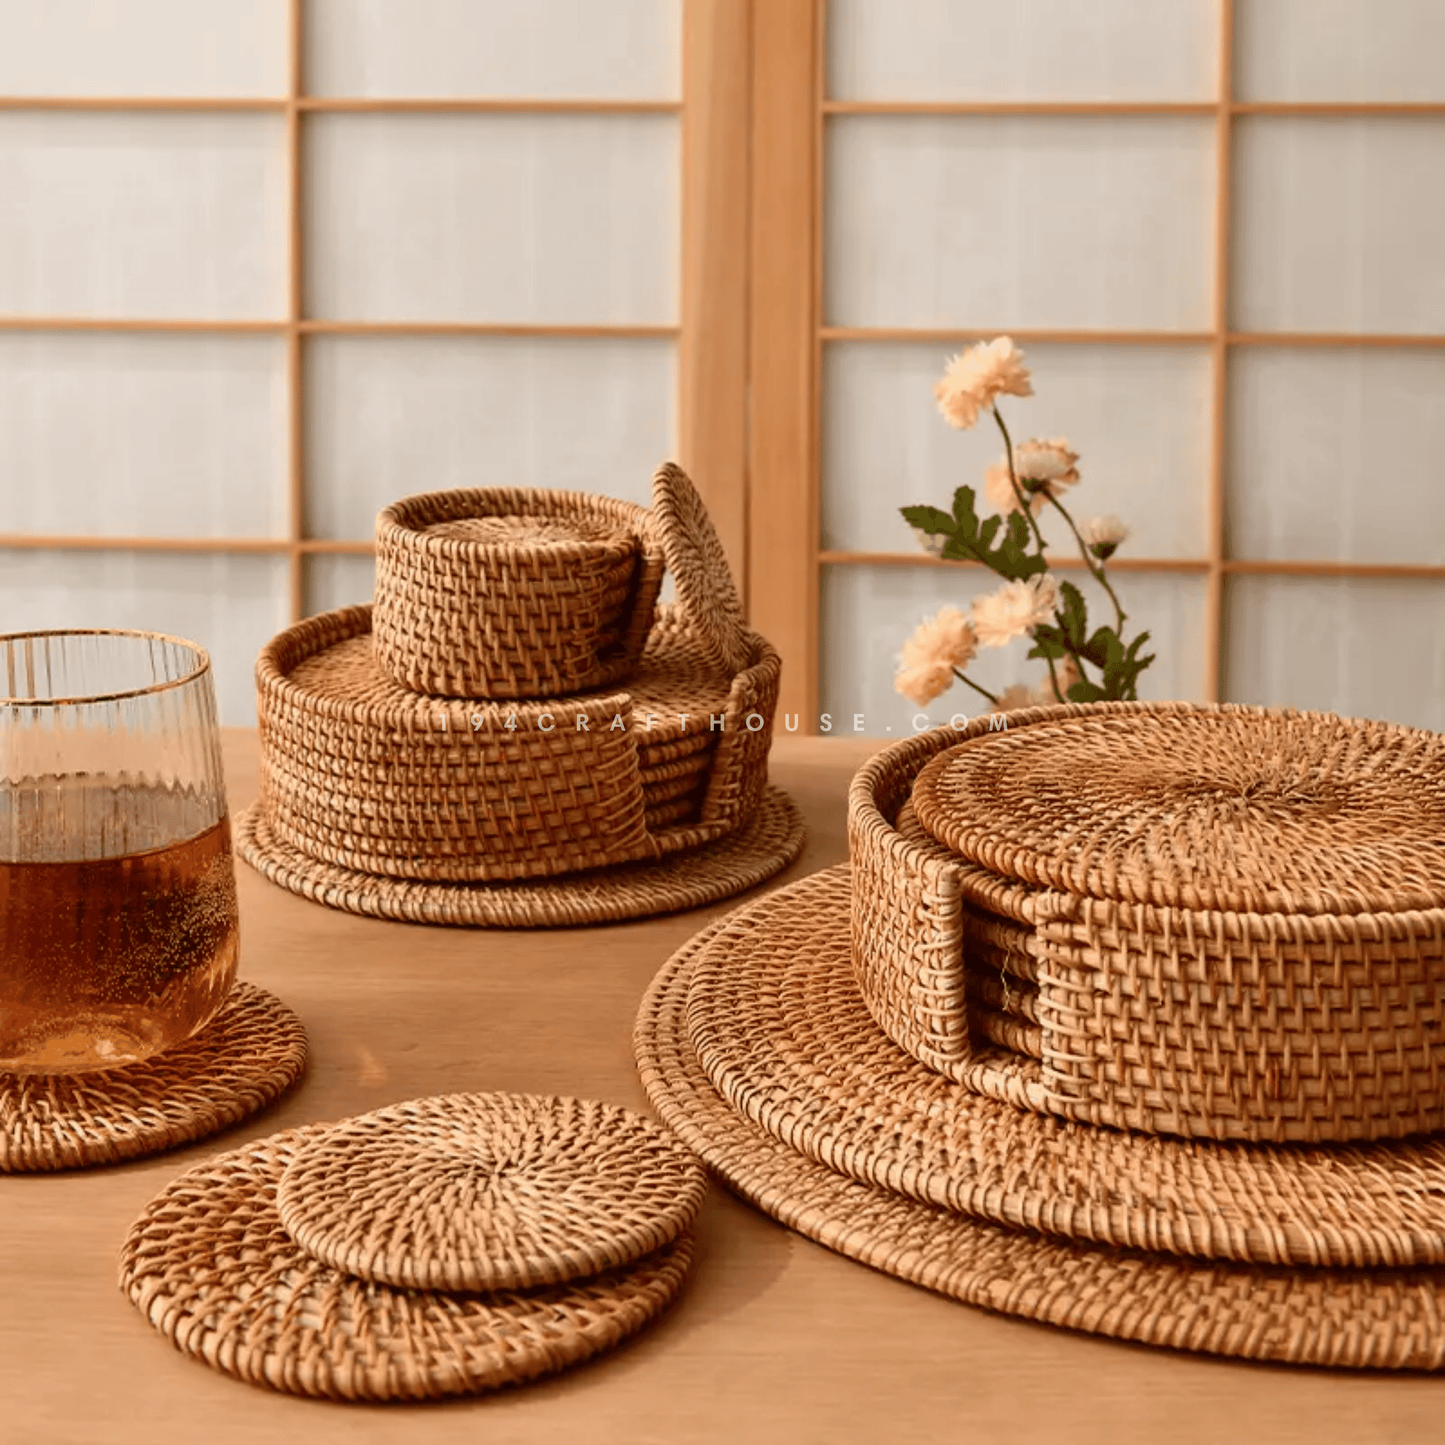 Round Woven Rattan Chargers Plate For Dinner Table Setting